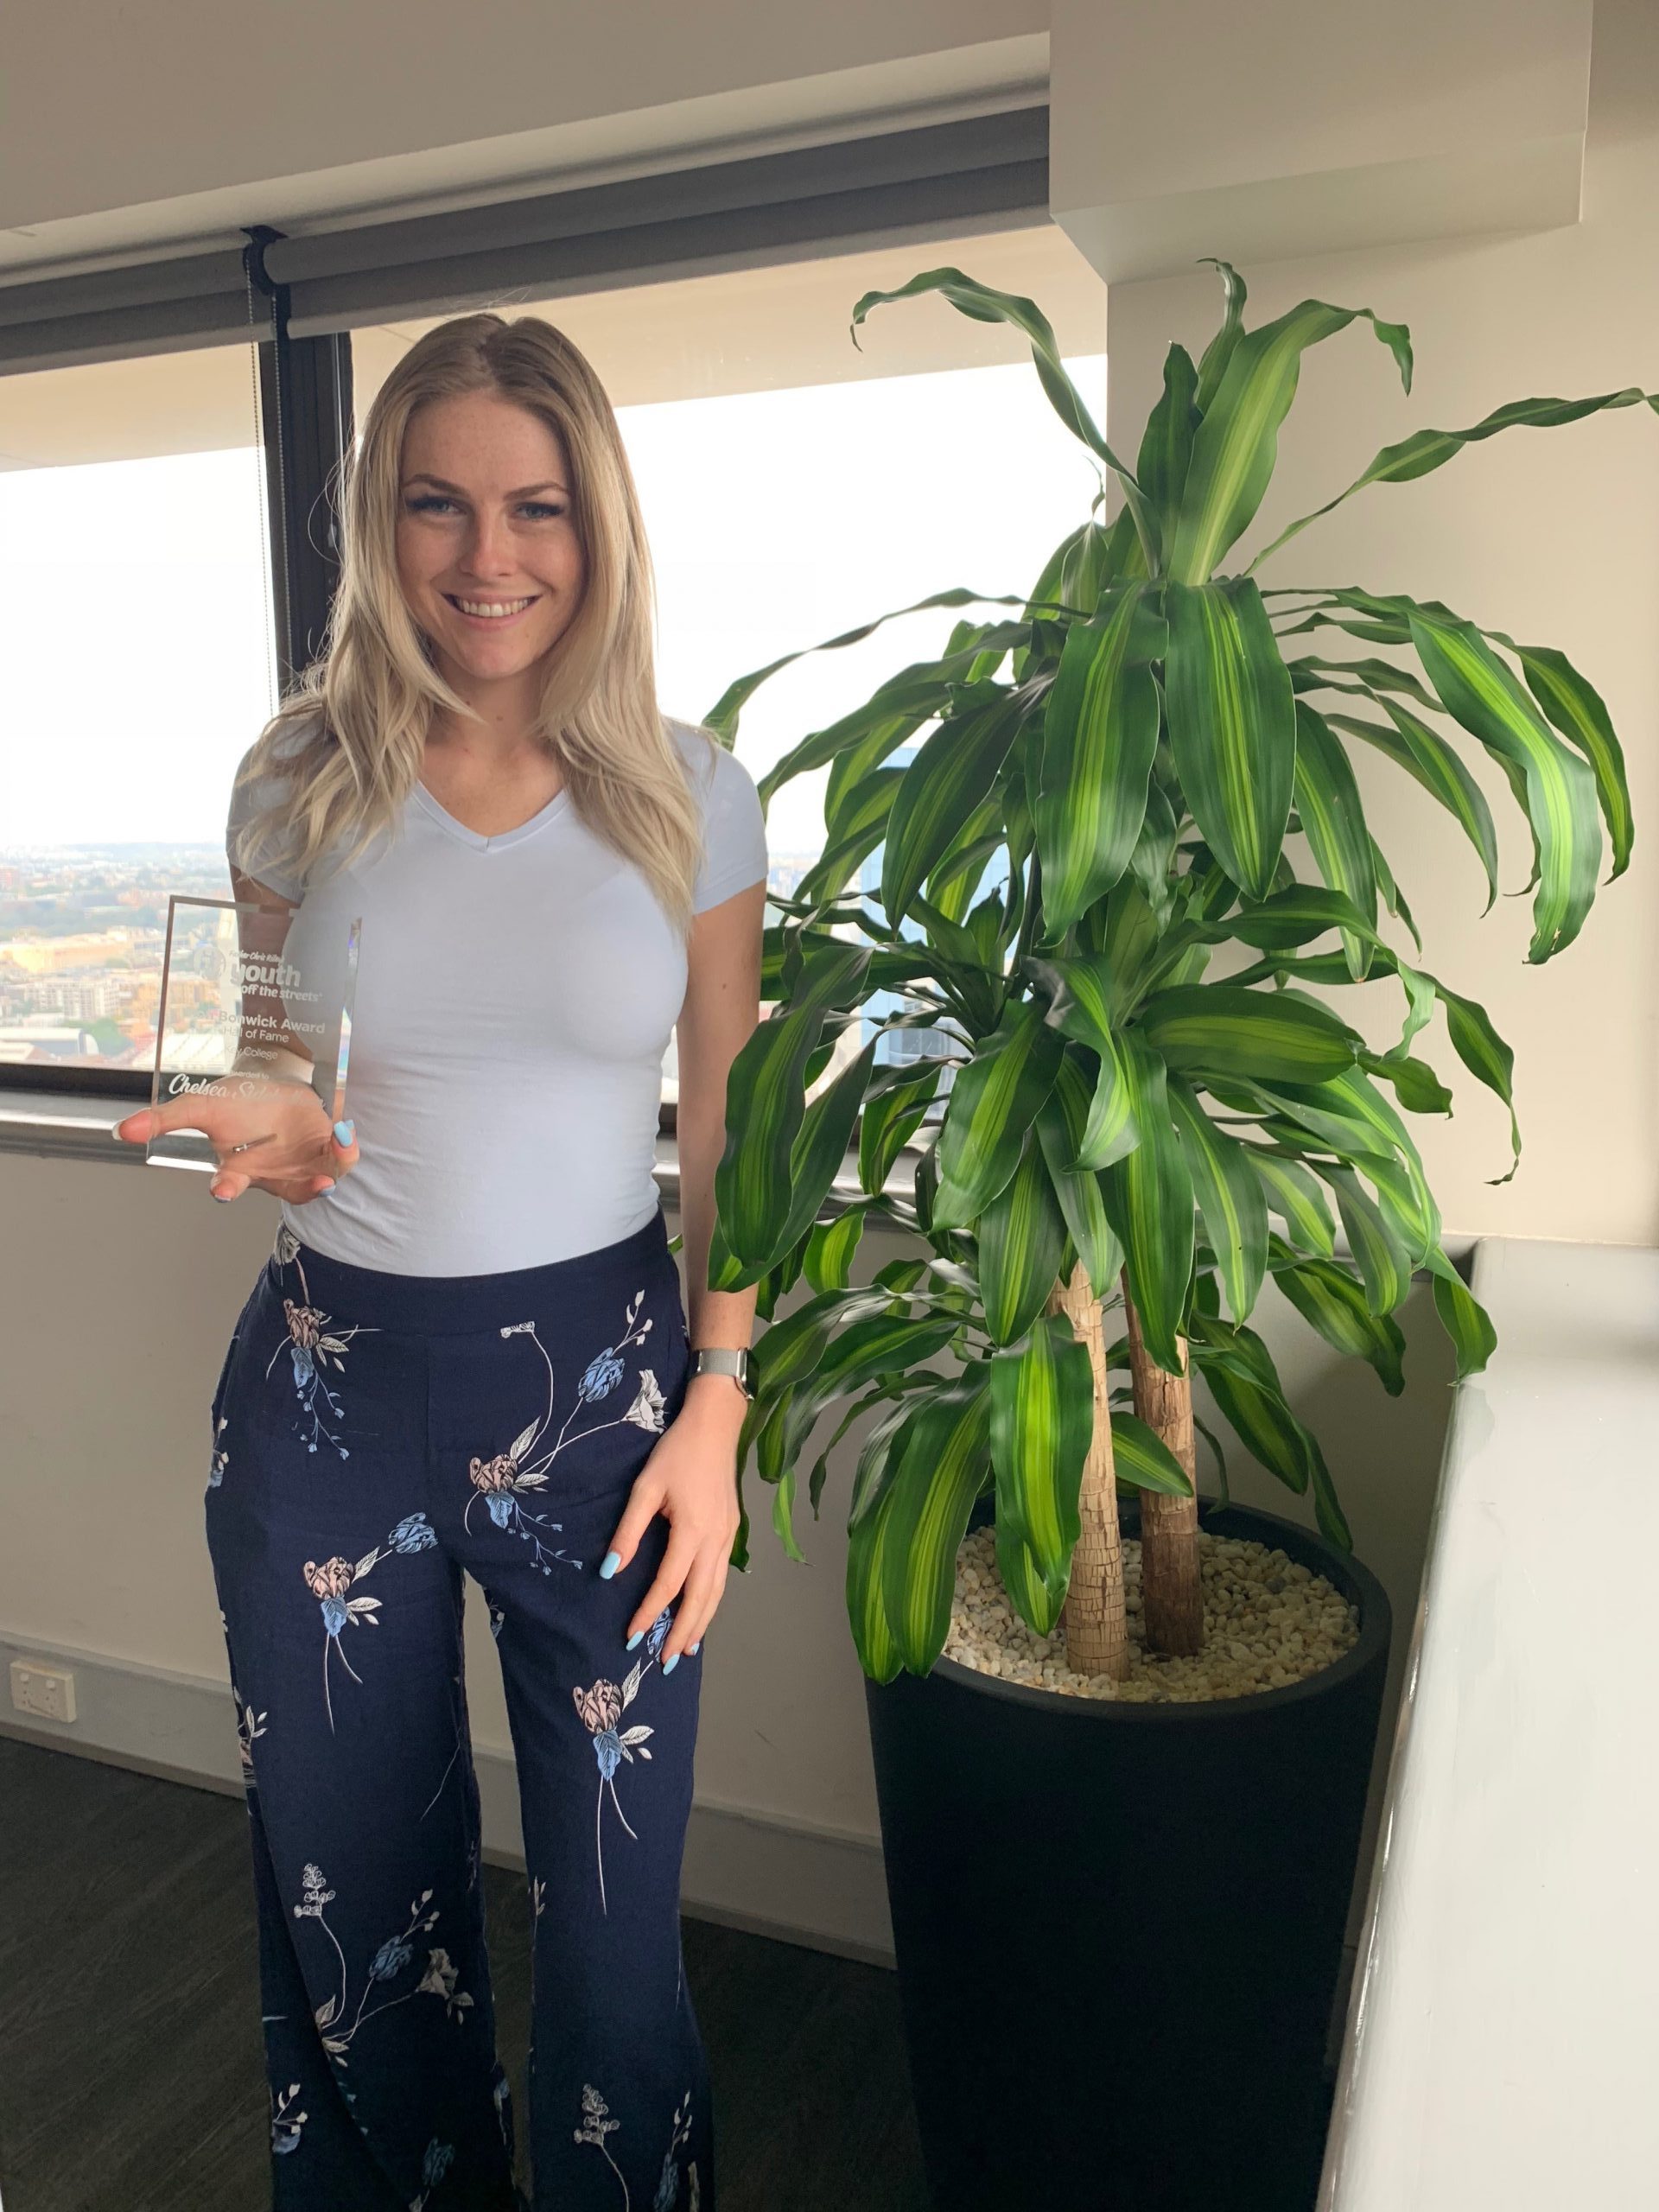 My experience working as a Job Coach for atWork Australia – by Chelsea, NSW